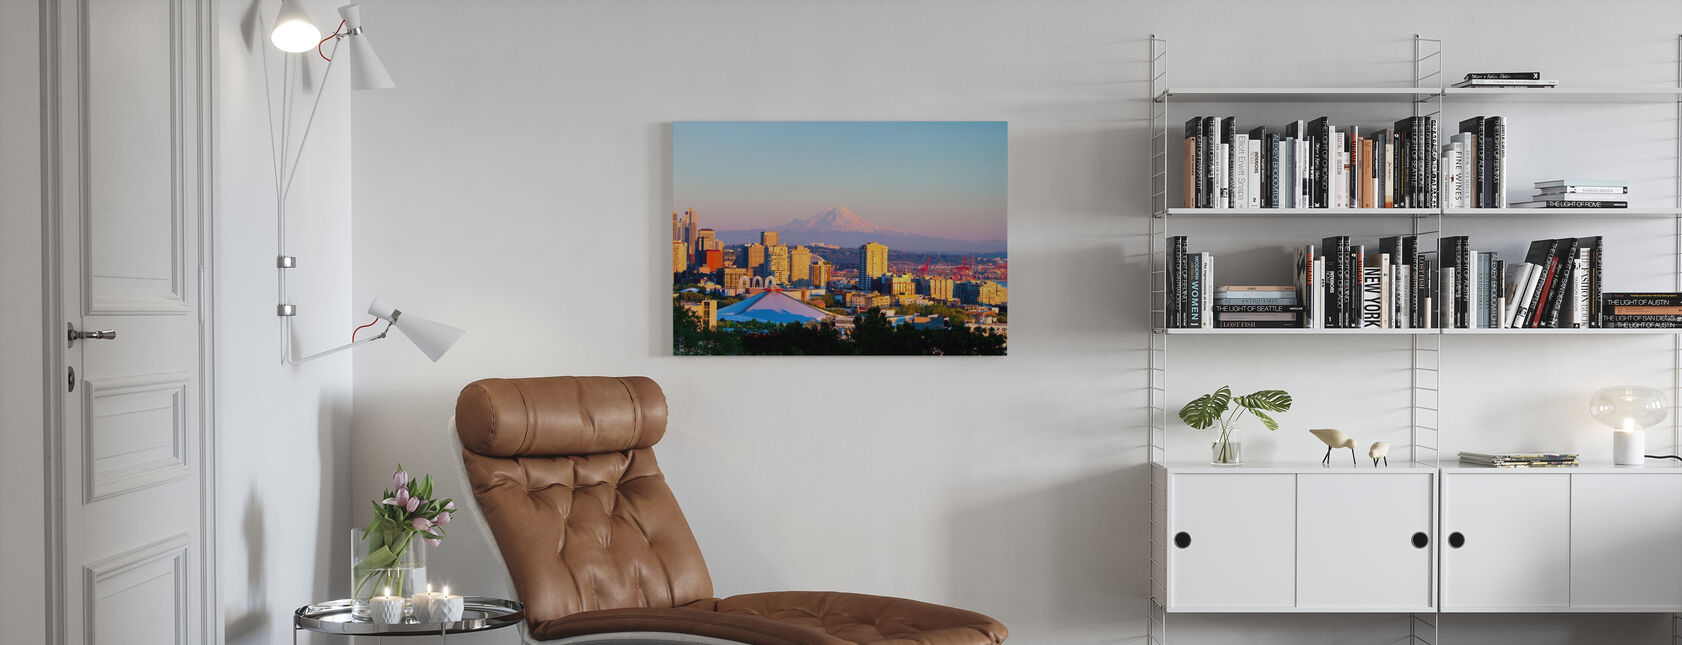 Seattle and Mount Rainier - Canvas print - Living Room